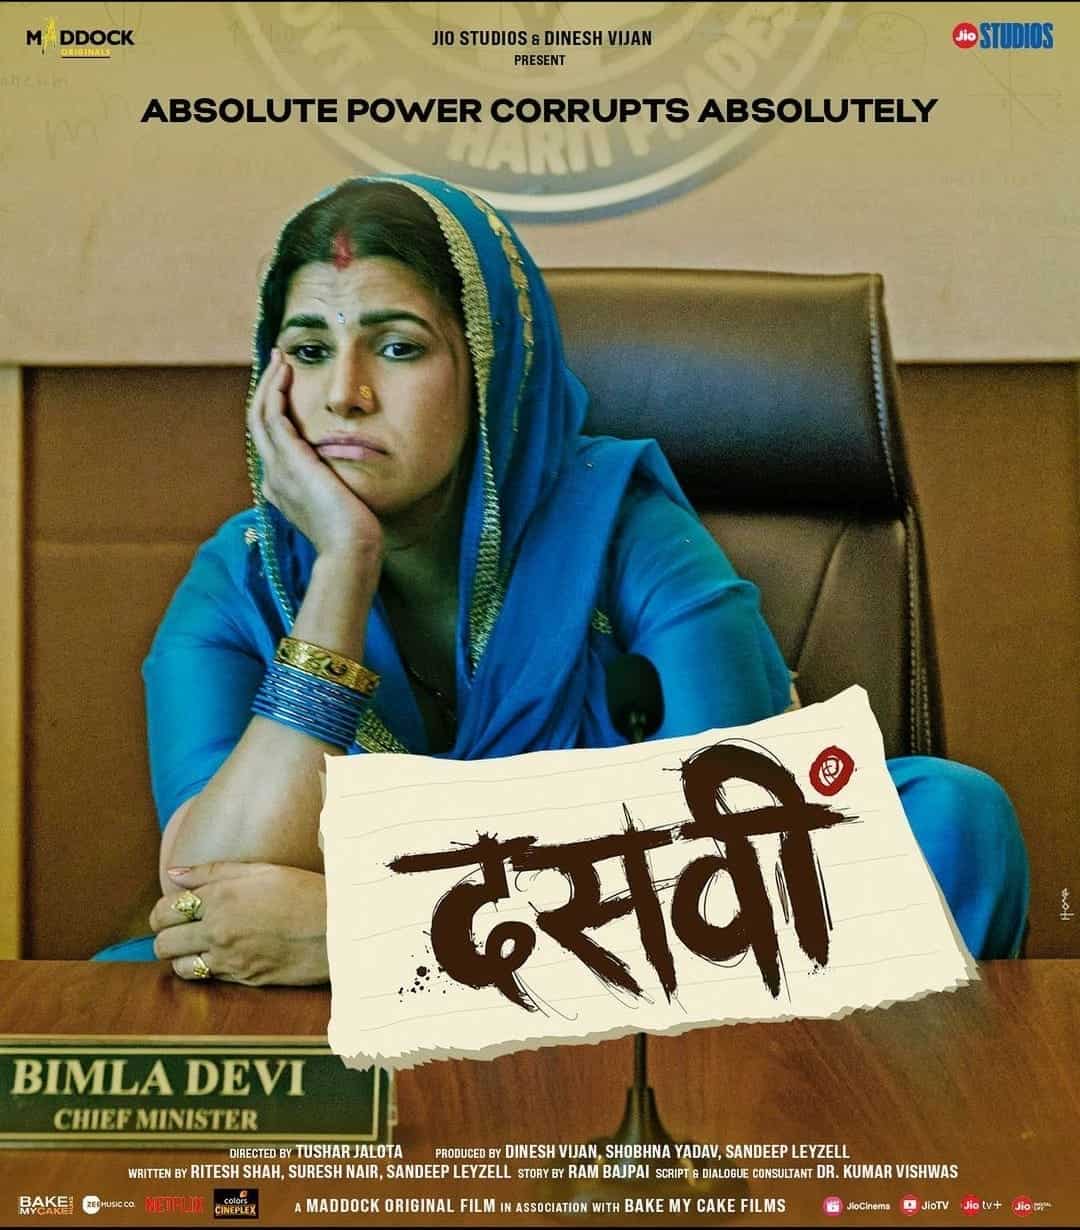 Kaur plays the role of Bimla Devi Chaudhary, the wife of Chief Minister Ganga Ram Chaudhary(Abhishek Bachchan). The former has to take over the political responsibilities of her husband, when he is sent to jail for a scam case. 